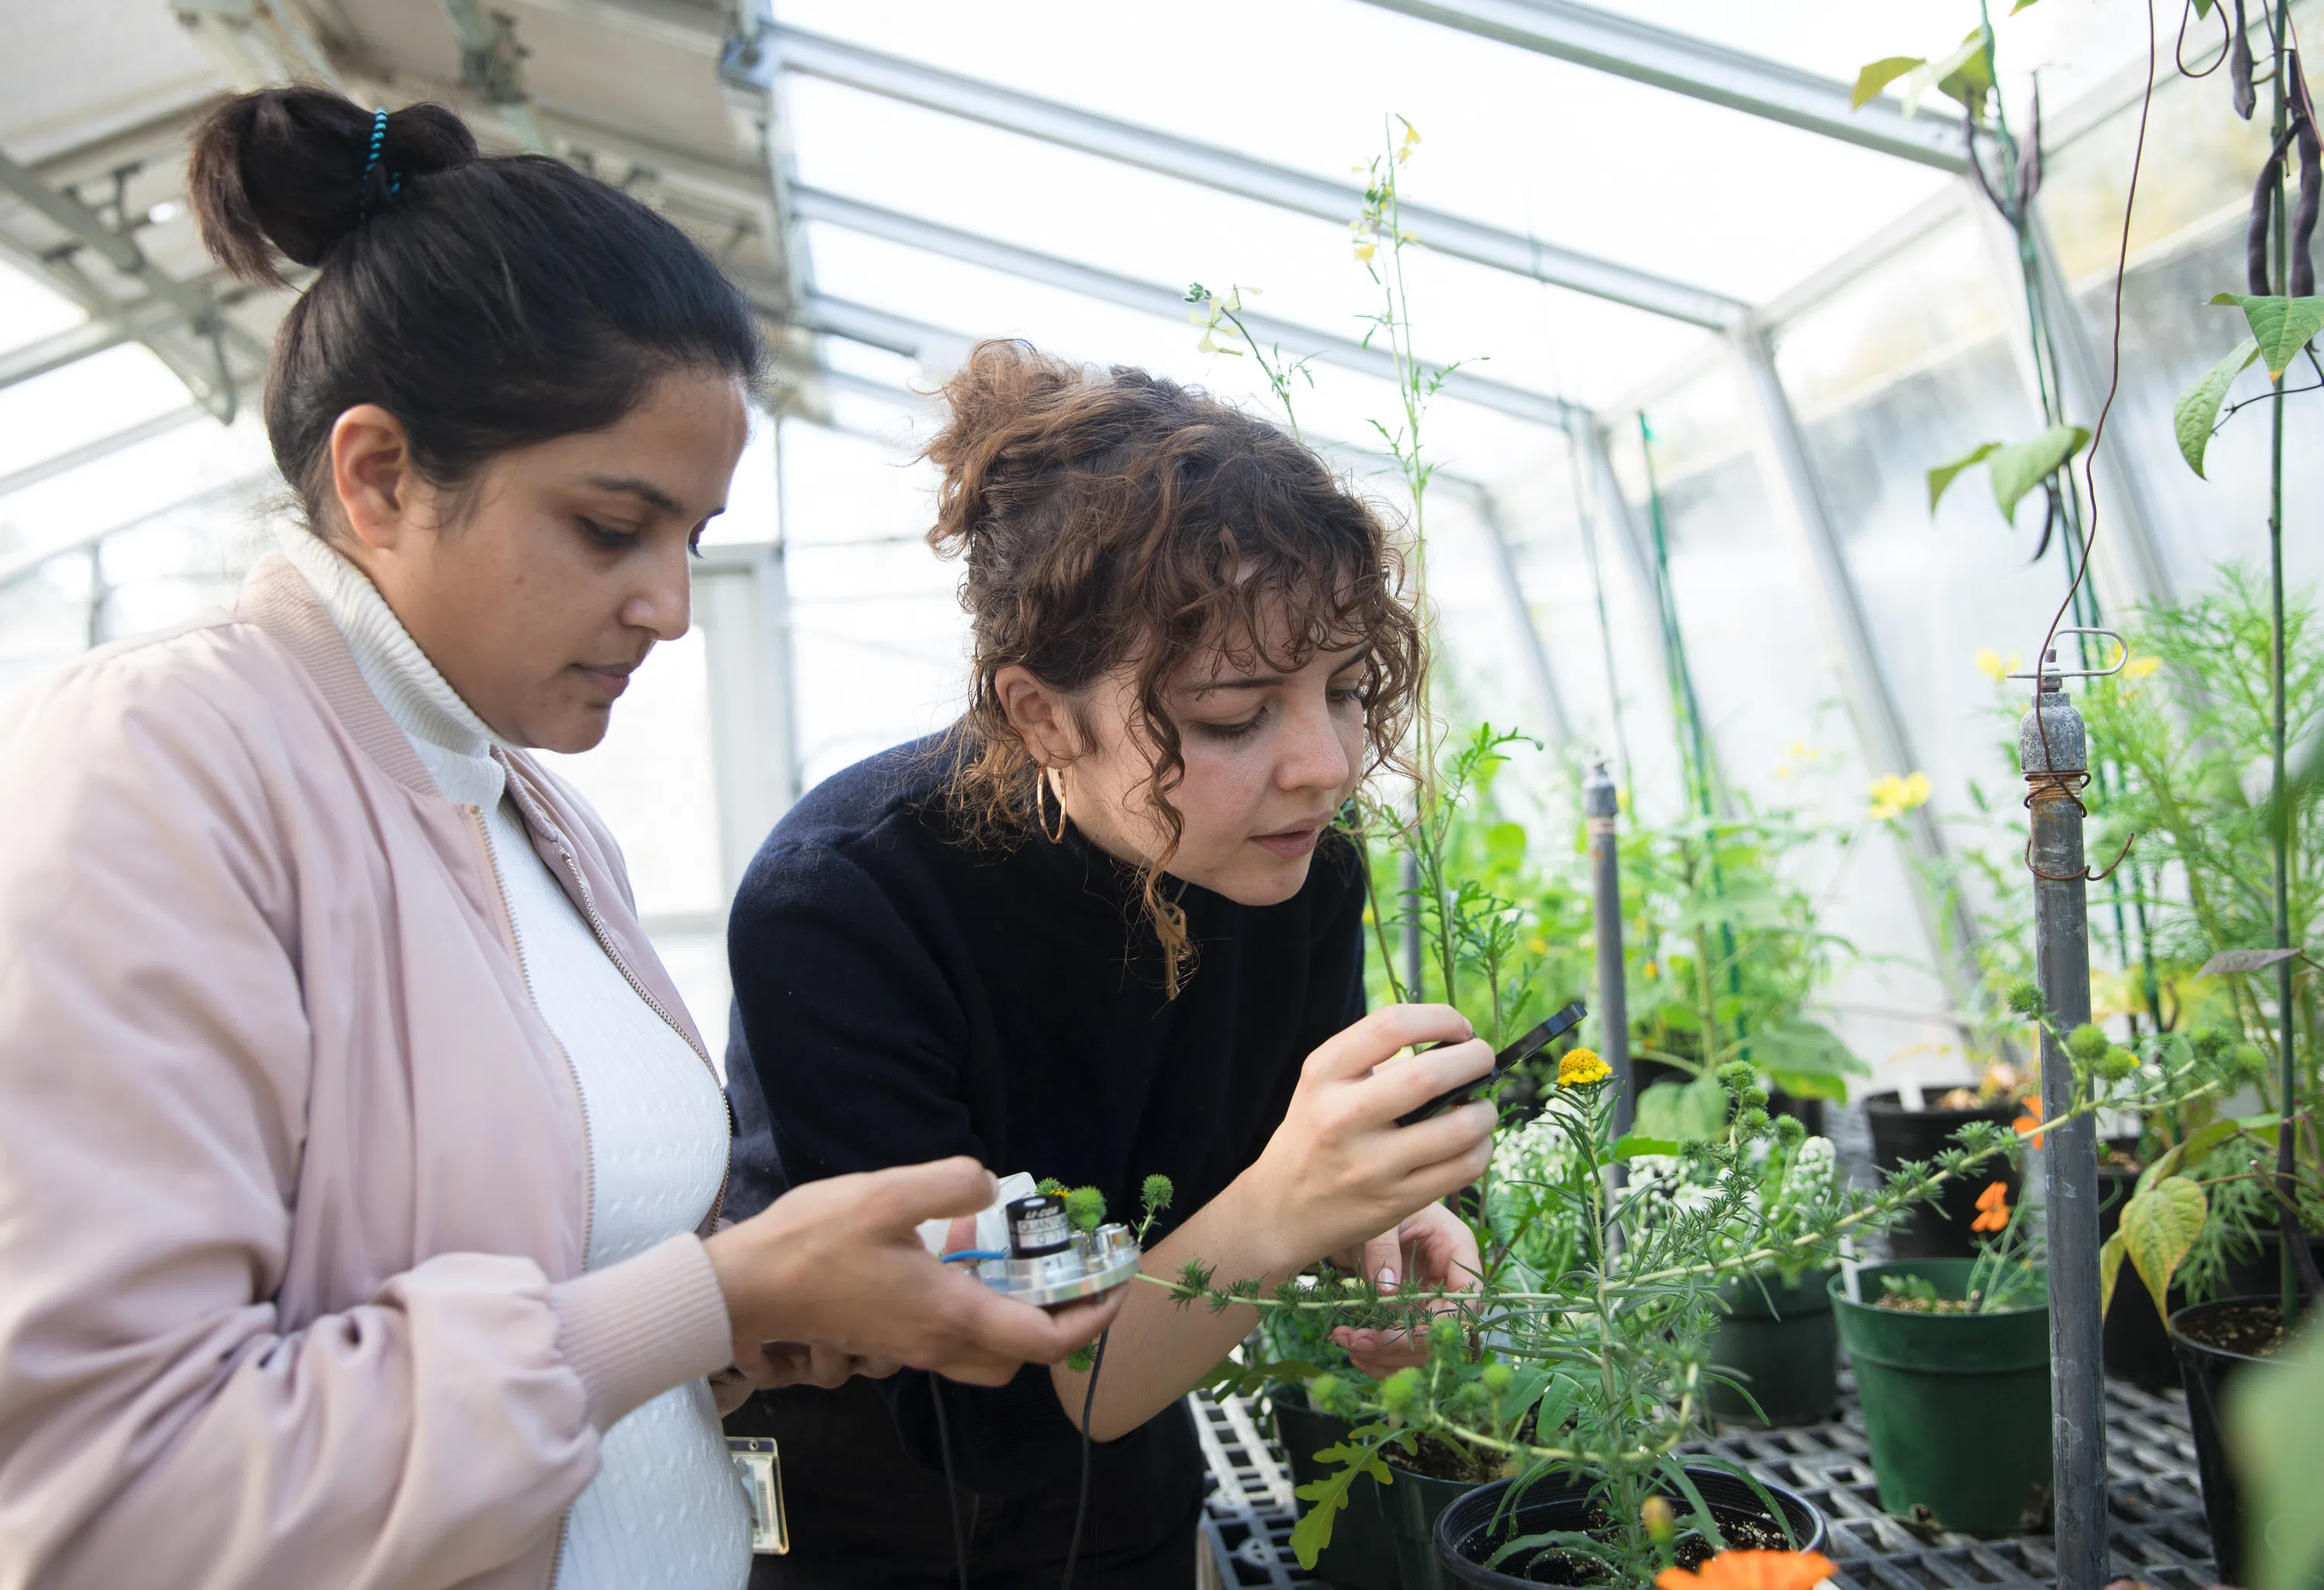 Students work in a greenhouse